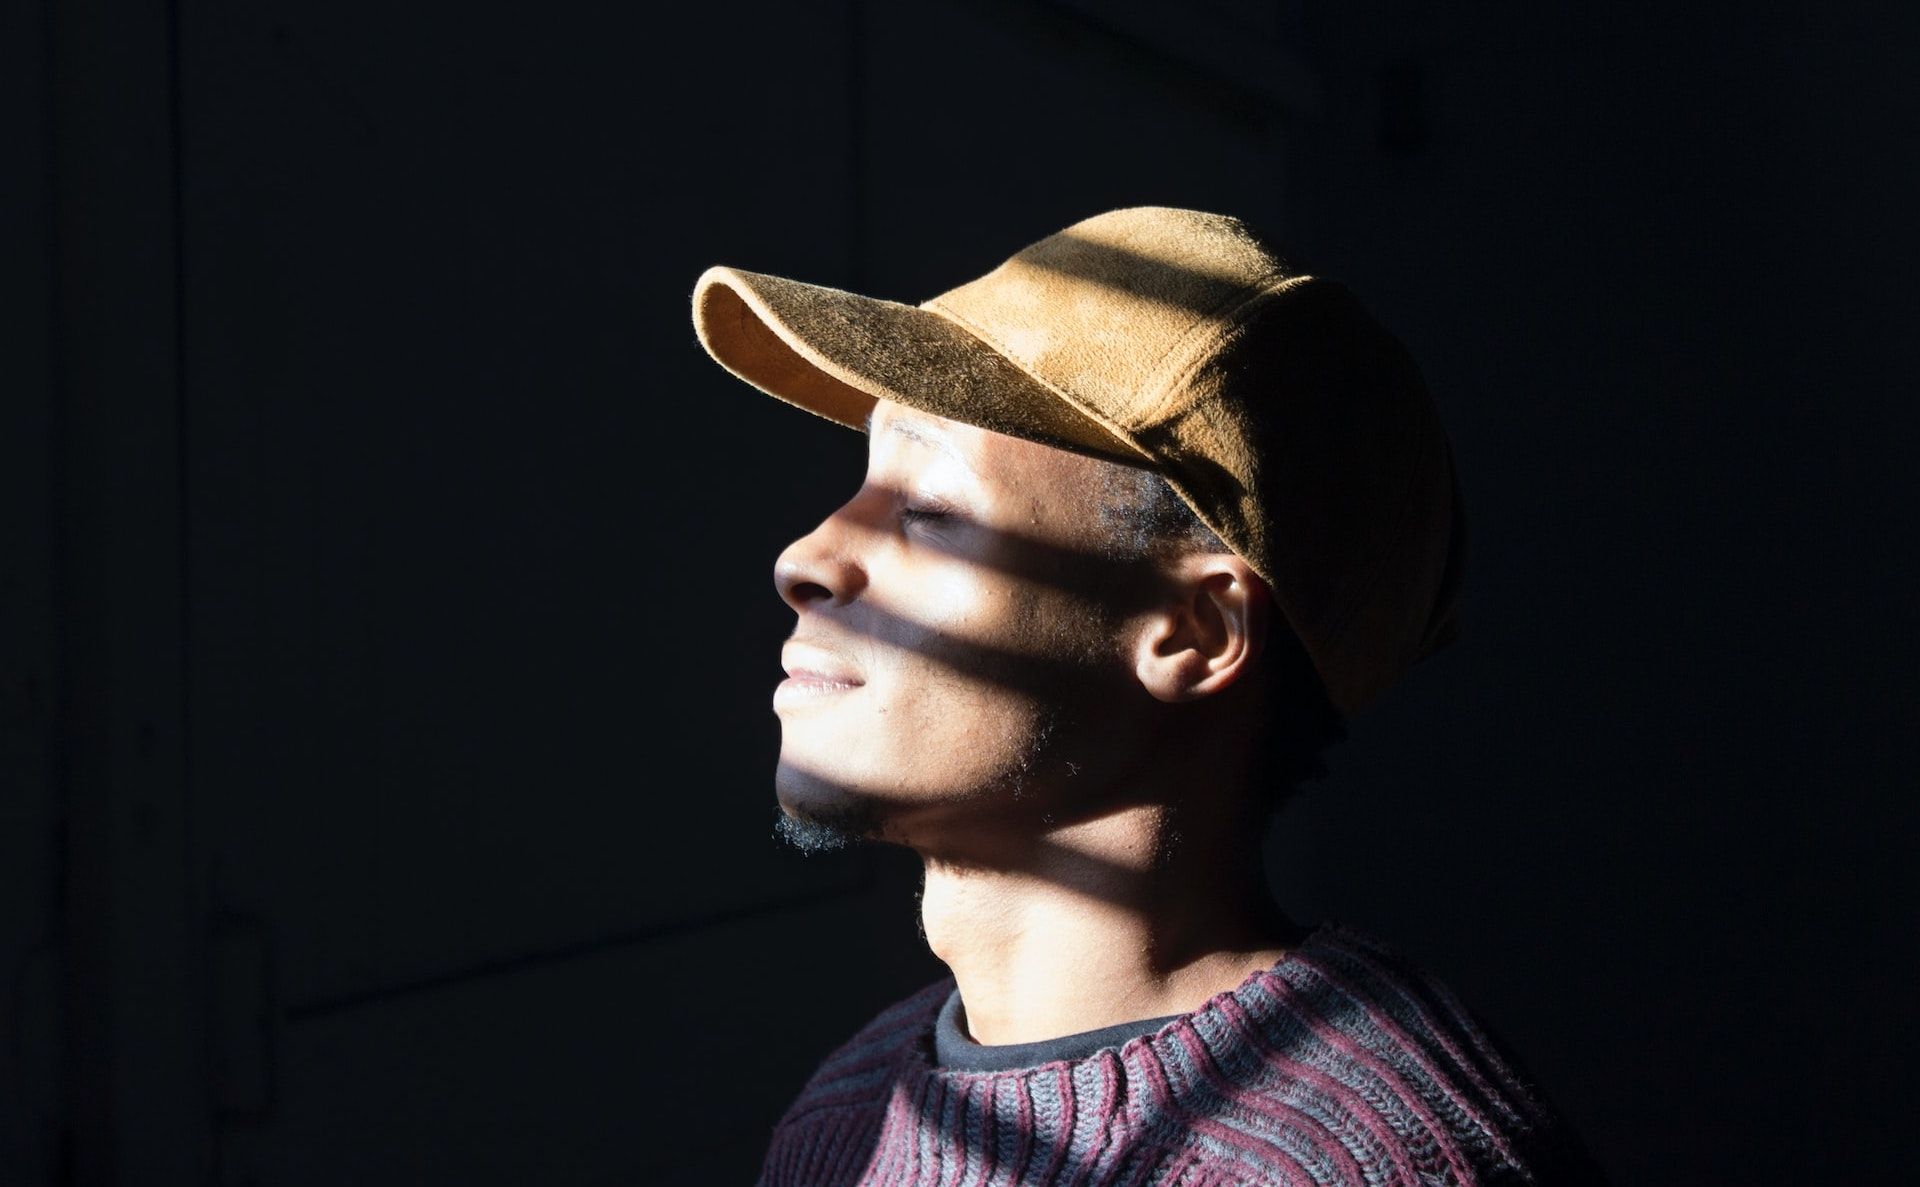 Self portrait of a man with shadows cast across his face